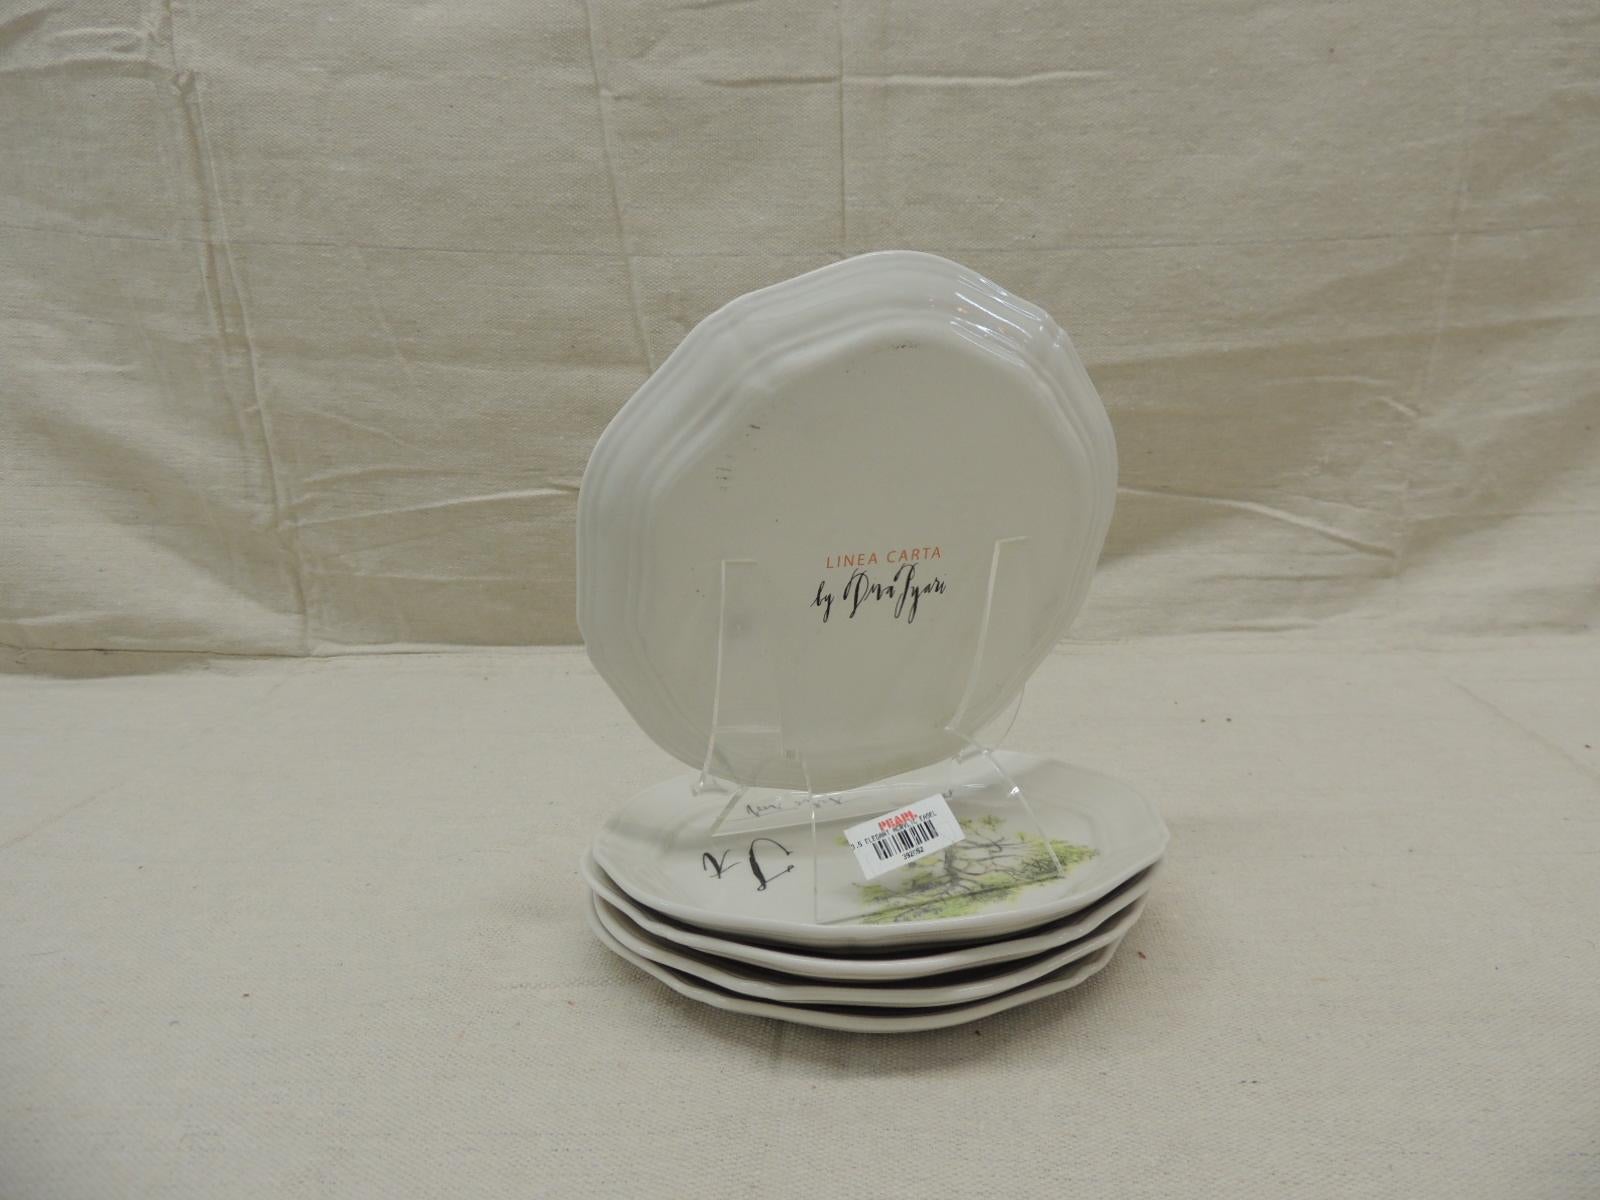 Set of (4) Linea Carta by Diva Pyari plates “T” dessert plates
for anthropology stores.
Size: 6.5” D.
 